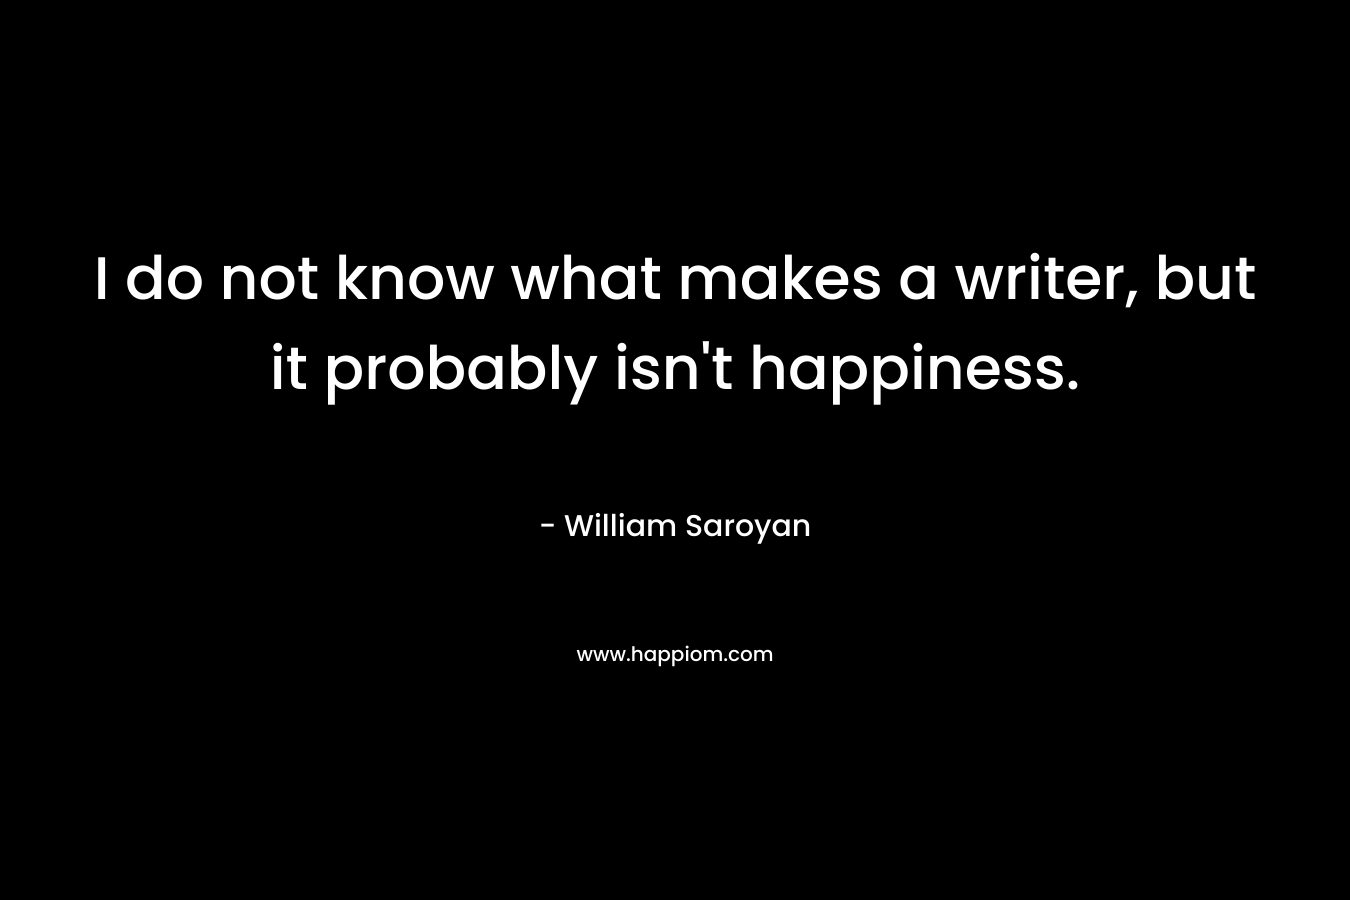 I do not know what makes a writer, but it probably isn’t happiness. – William Saroyan